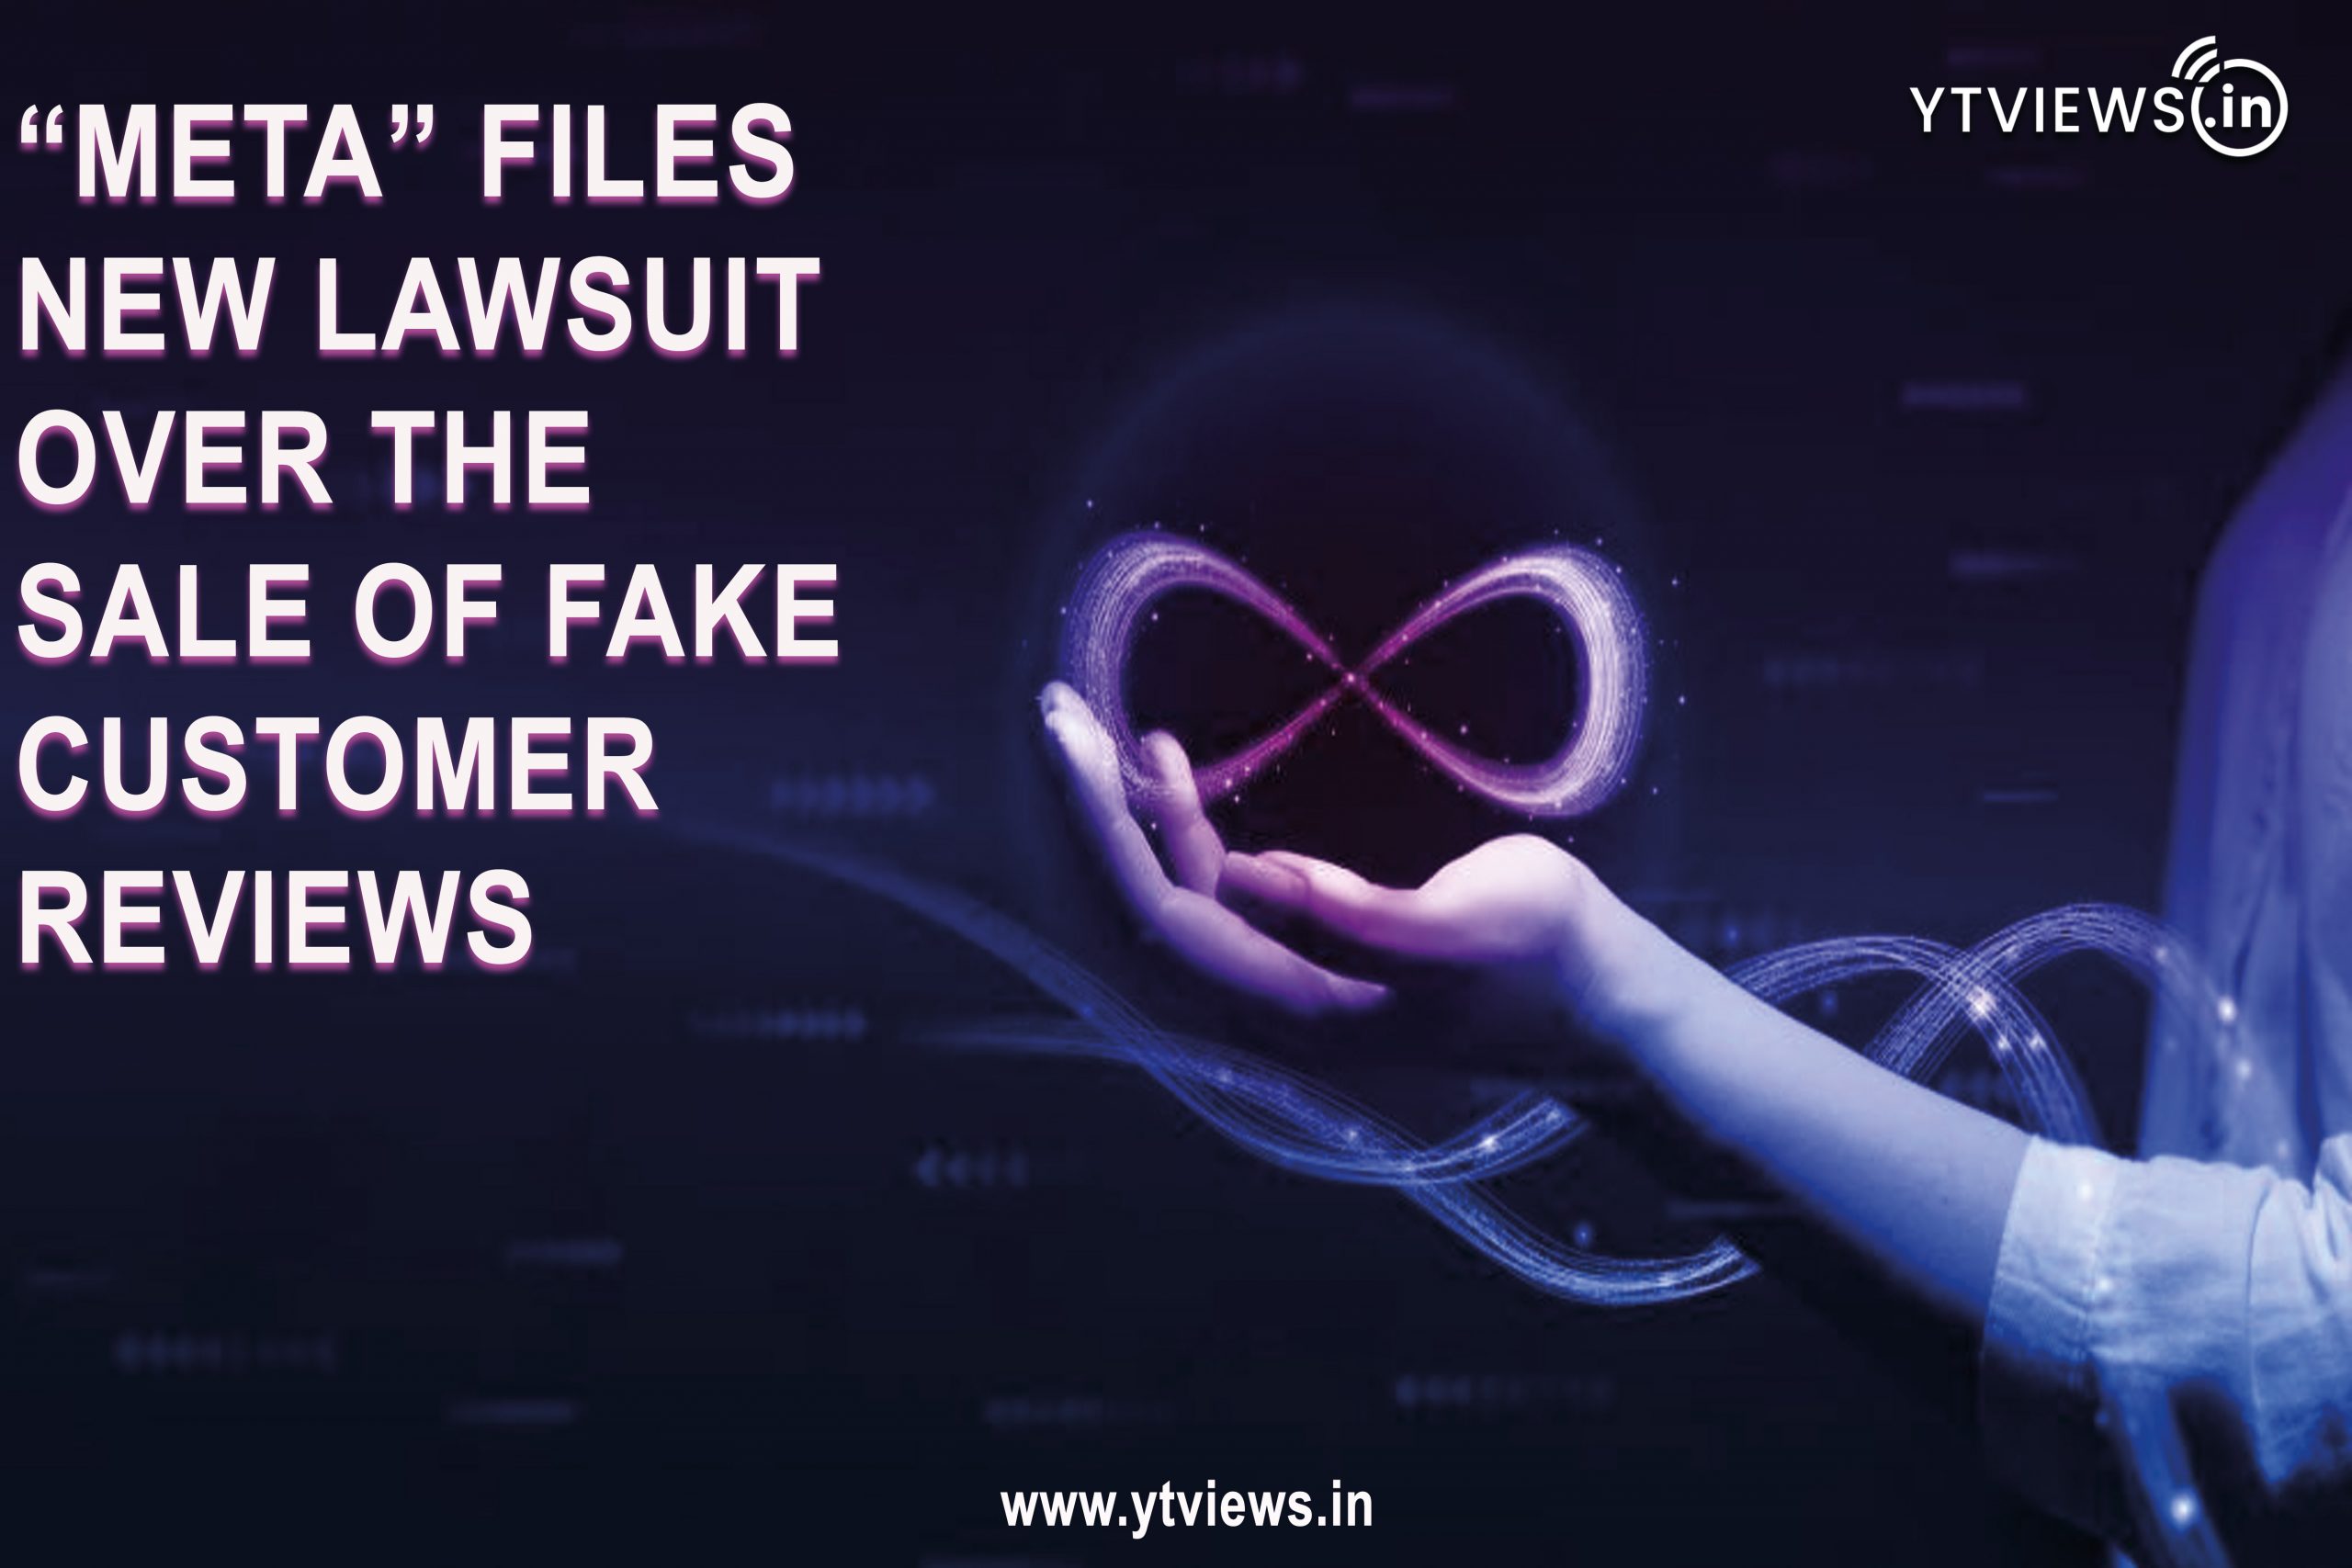 Meta files new lawsuit over the sale of fake customer reviews